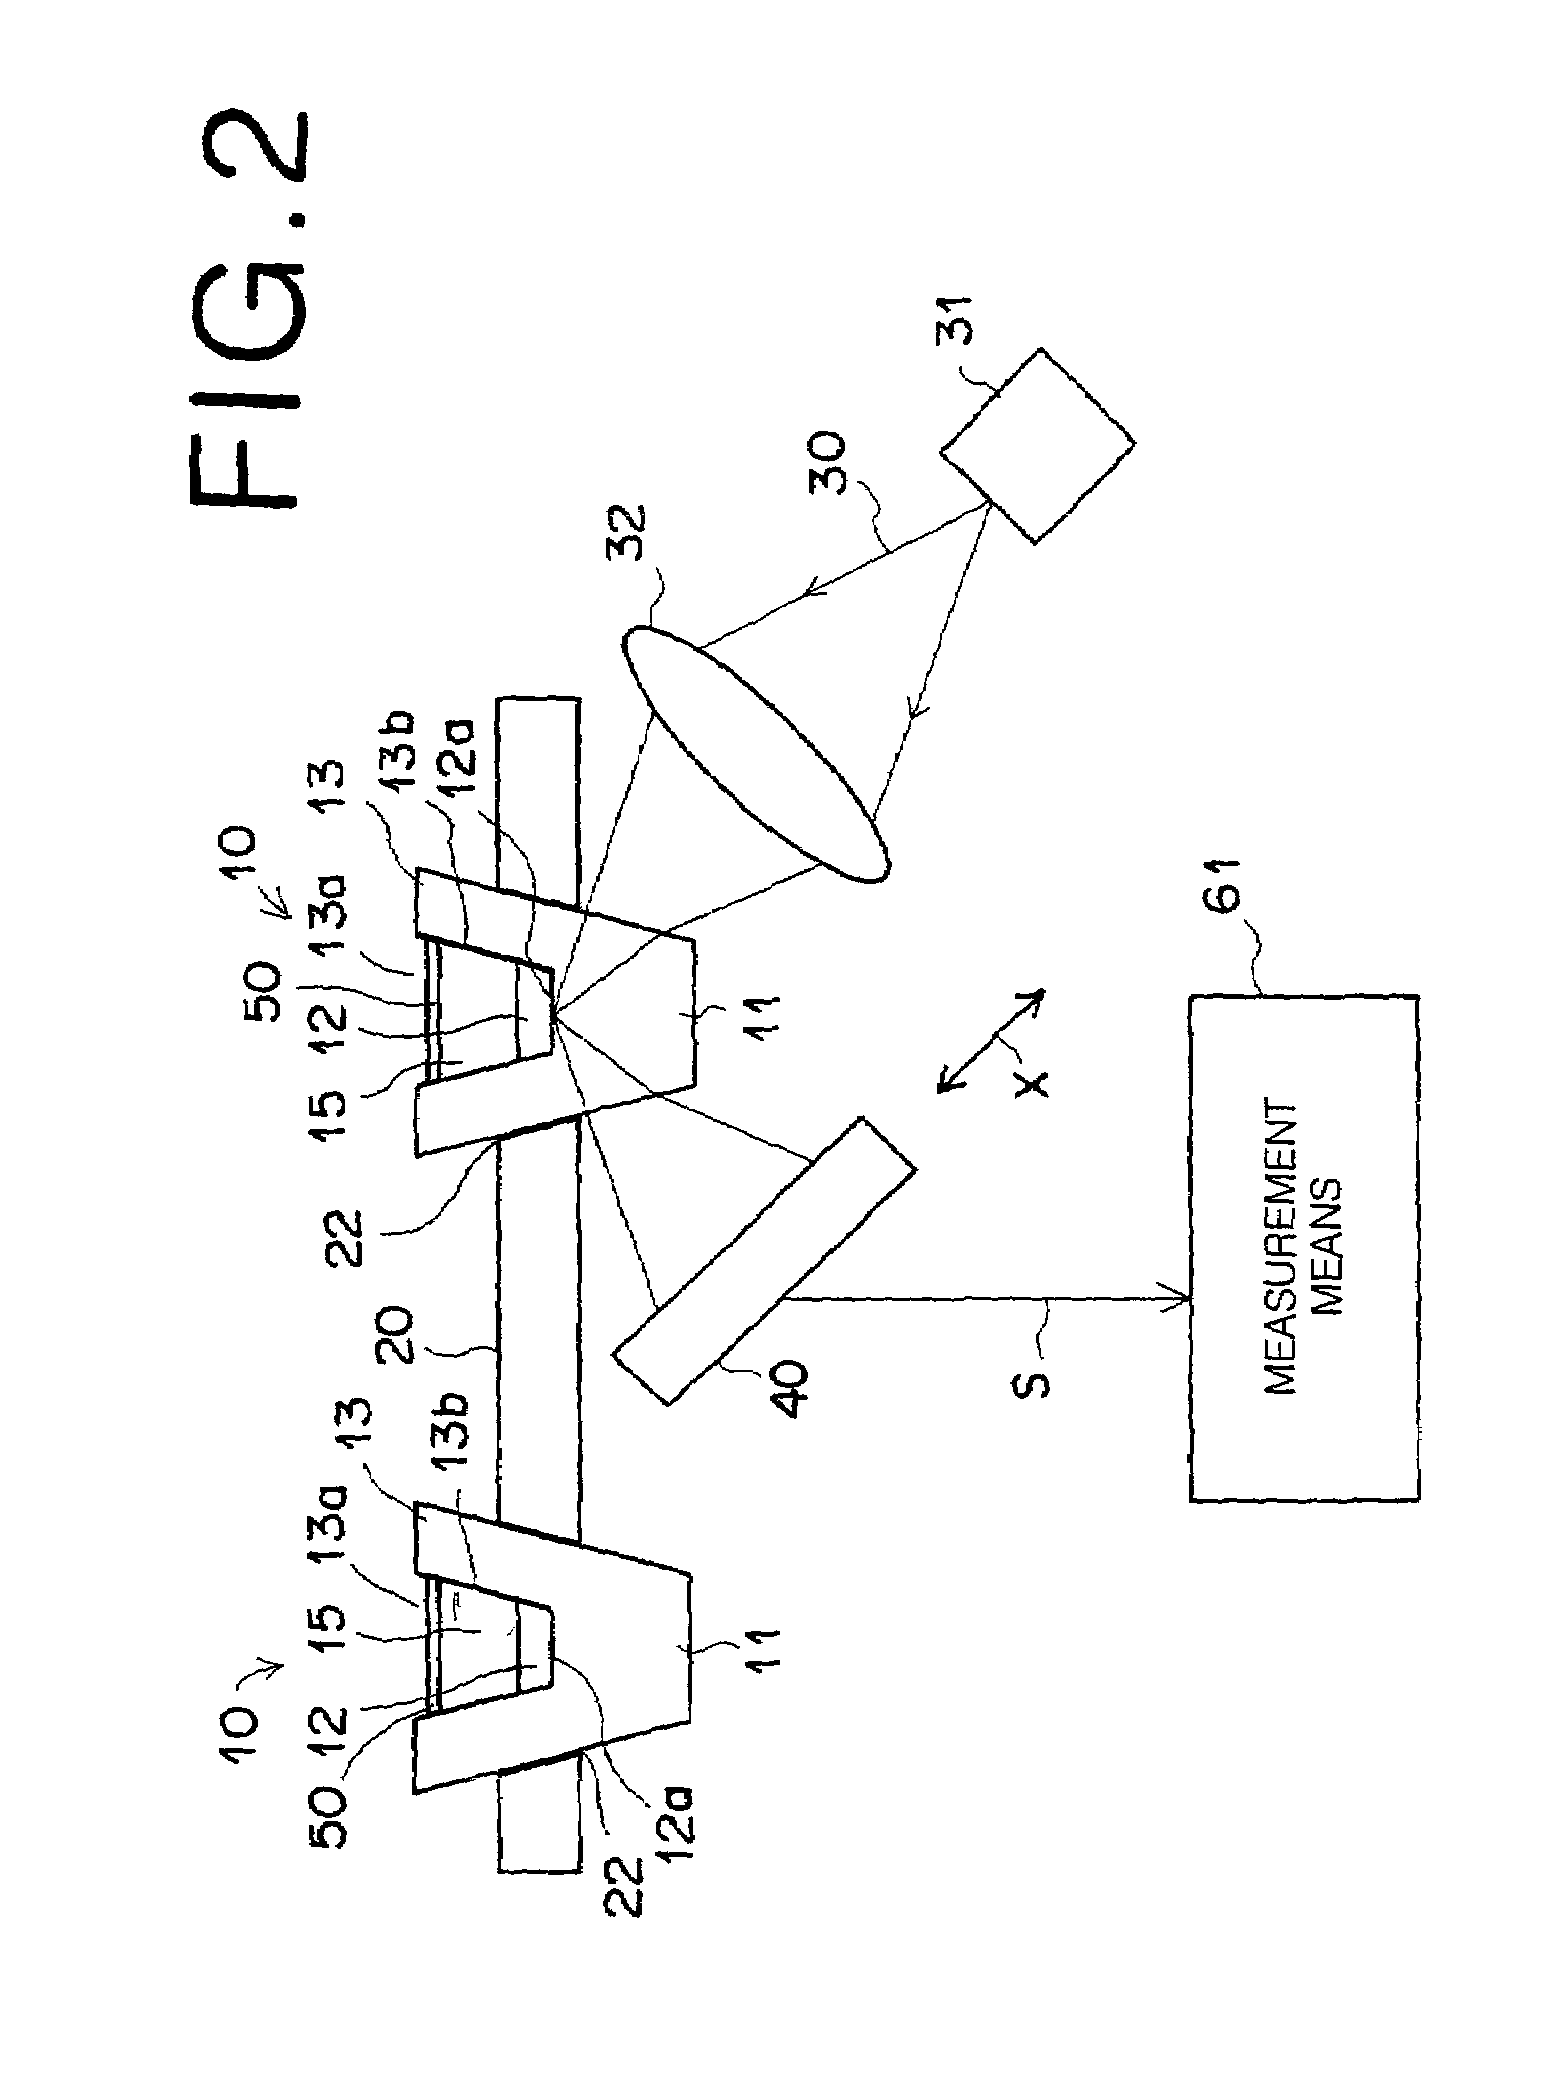 Measuring sensor utilizing attenuated total reflection and measuring chip assembly